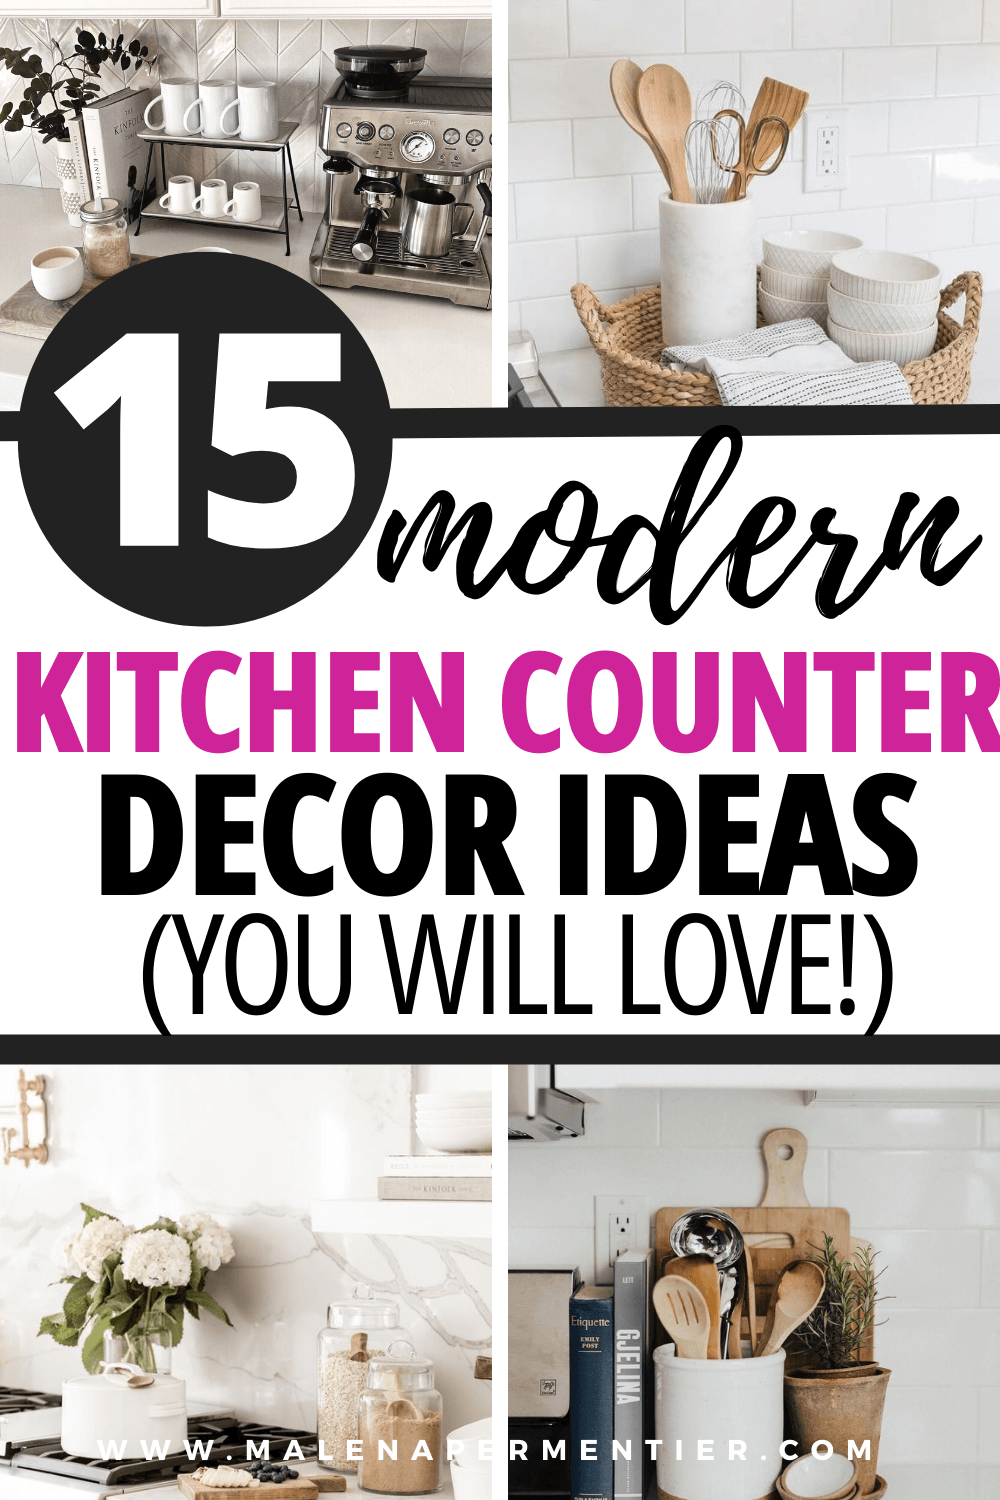 15 Insanely Cute Kitchen Counter Decor Ideas You Need to Try